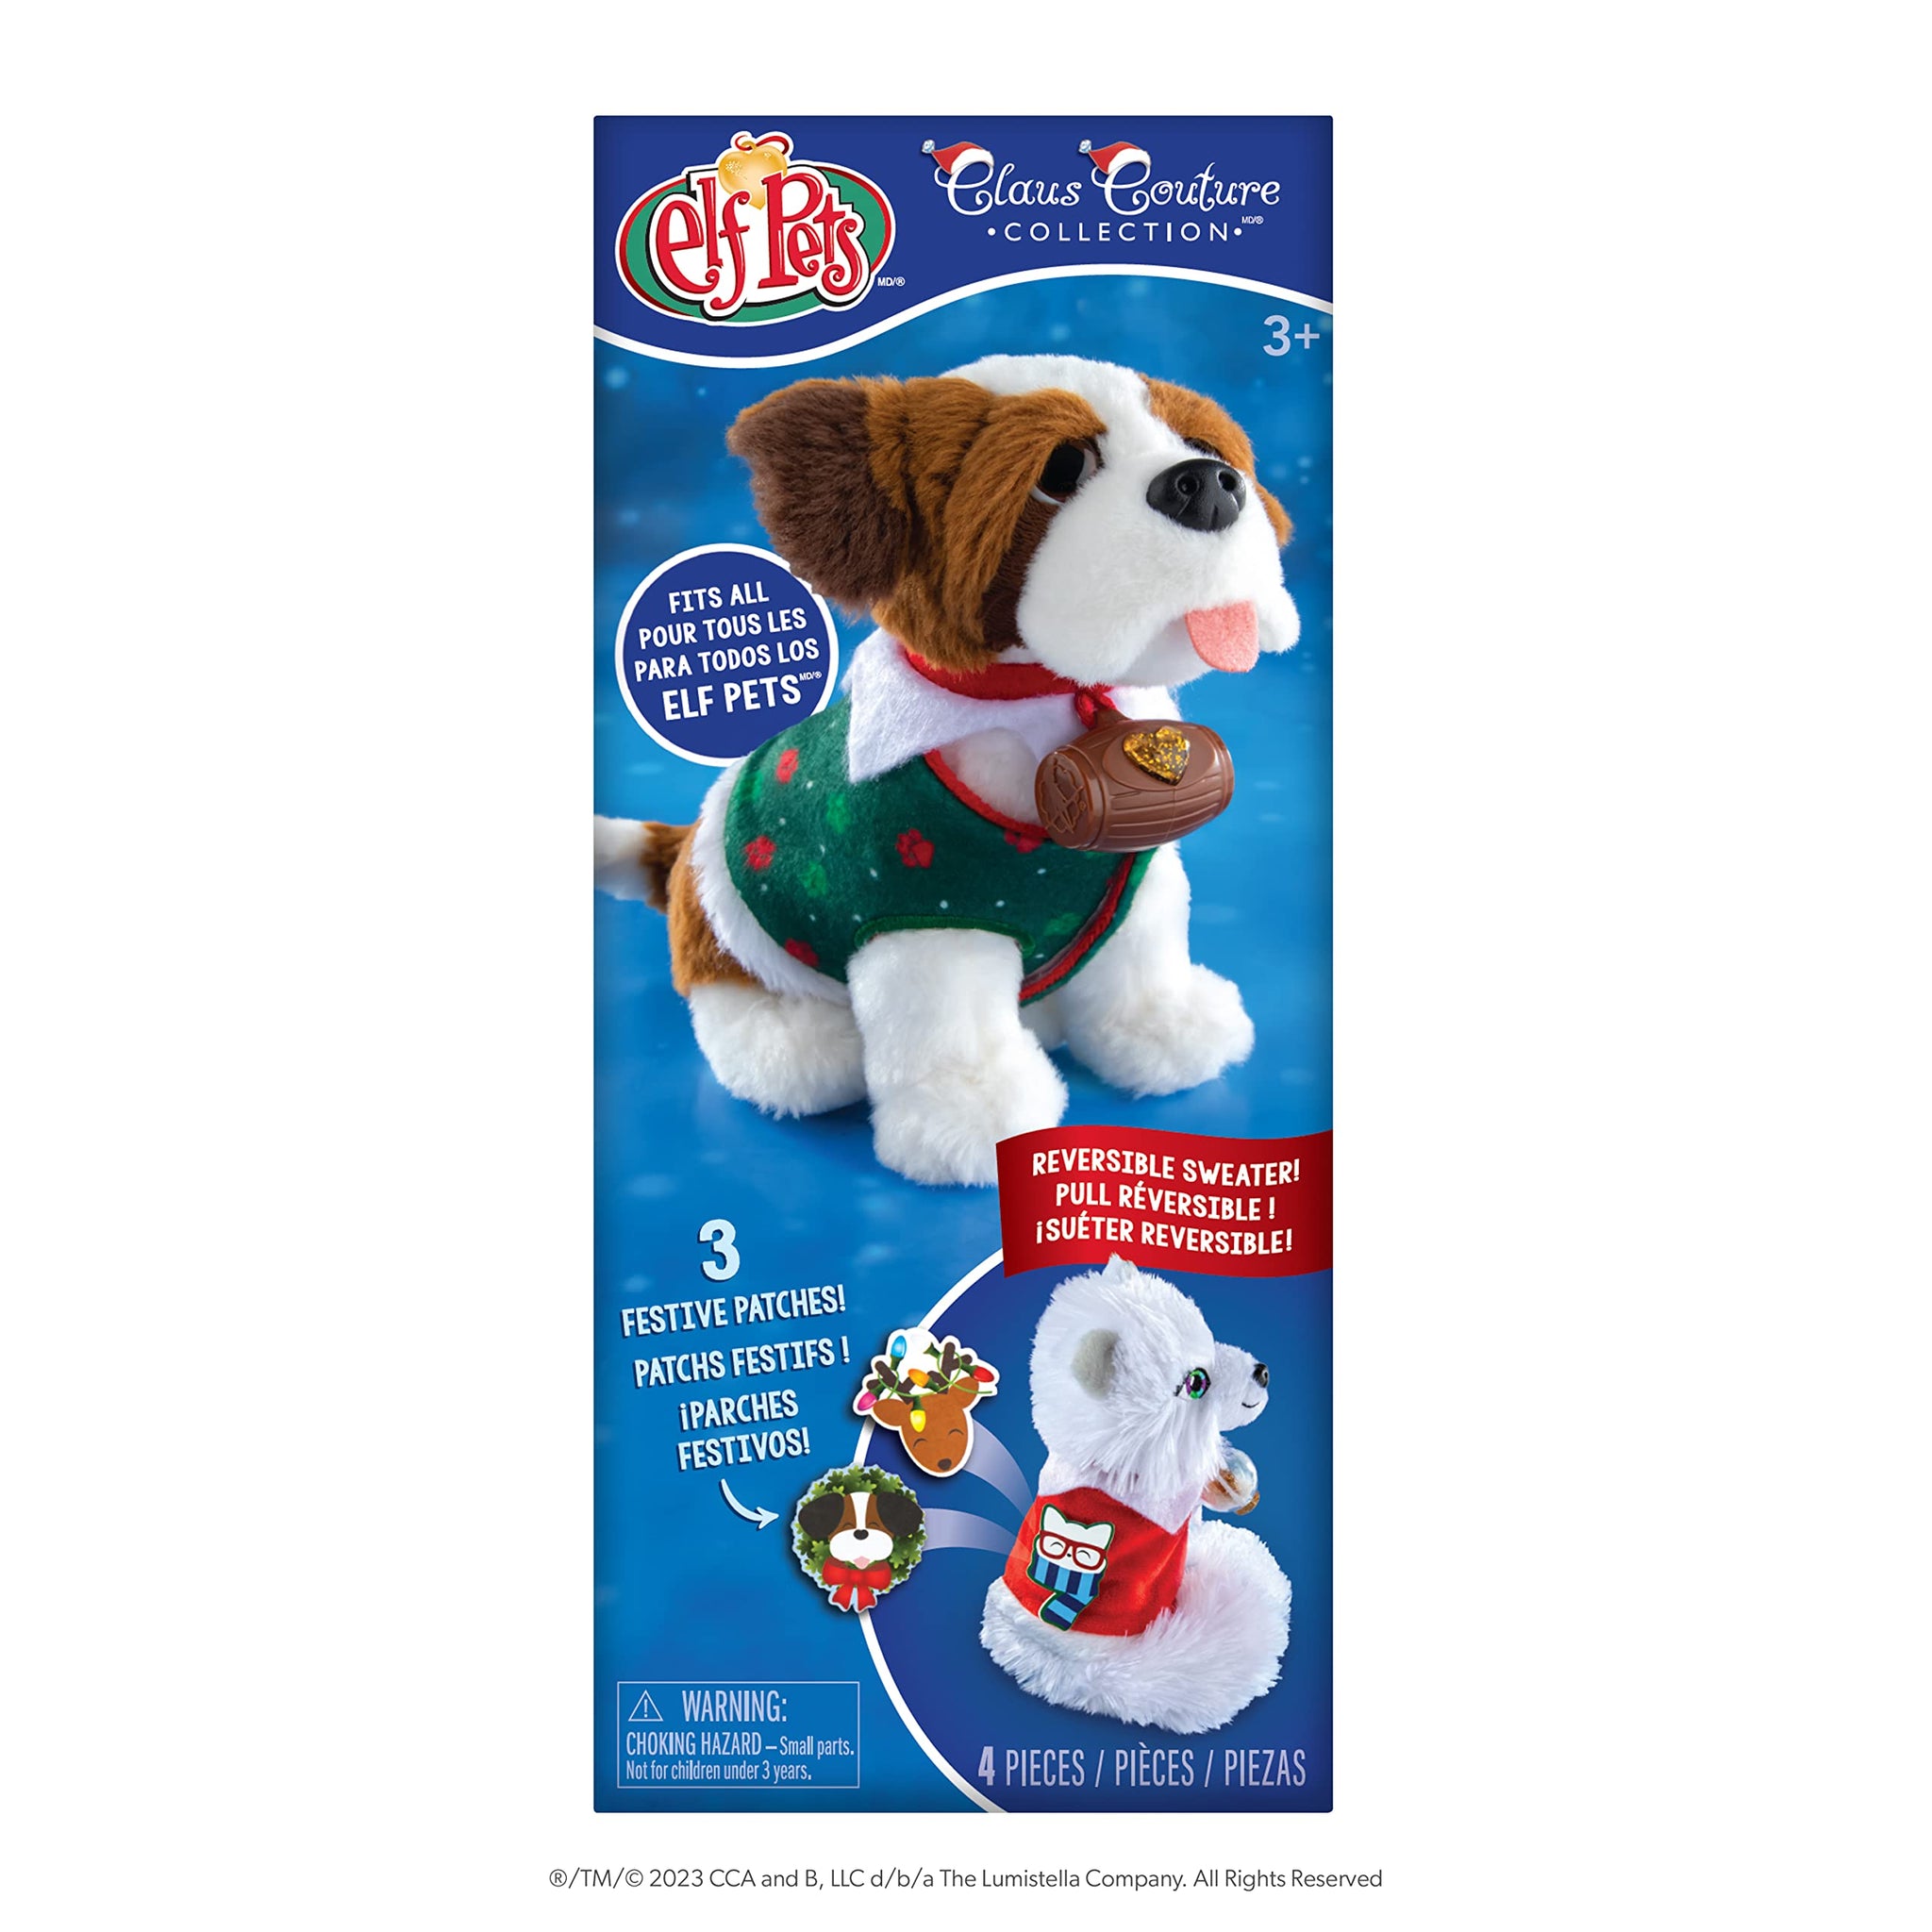 The Elf on the Shelf Elf Pets Christmas Sweater Set - Cozy, Reversible Sweater for Your Elf Pet- Includes 3 Festive Patches